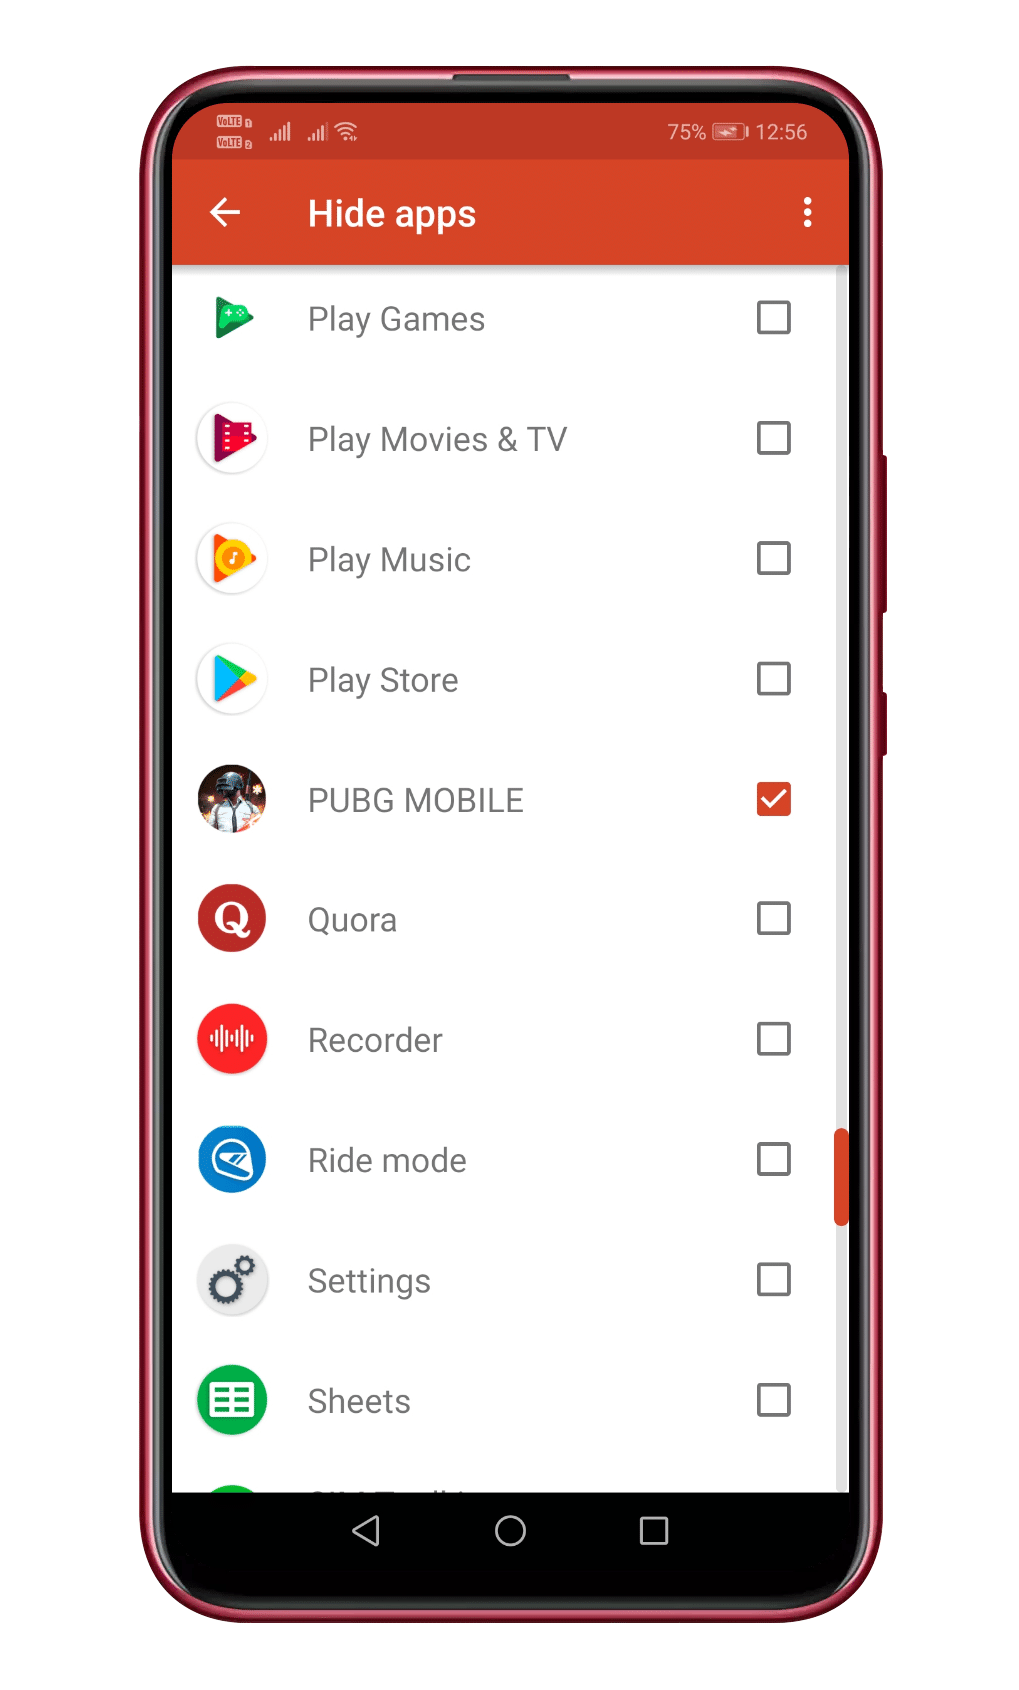 Select the apps that you want to hide